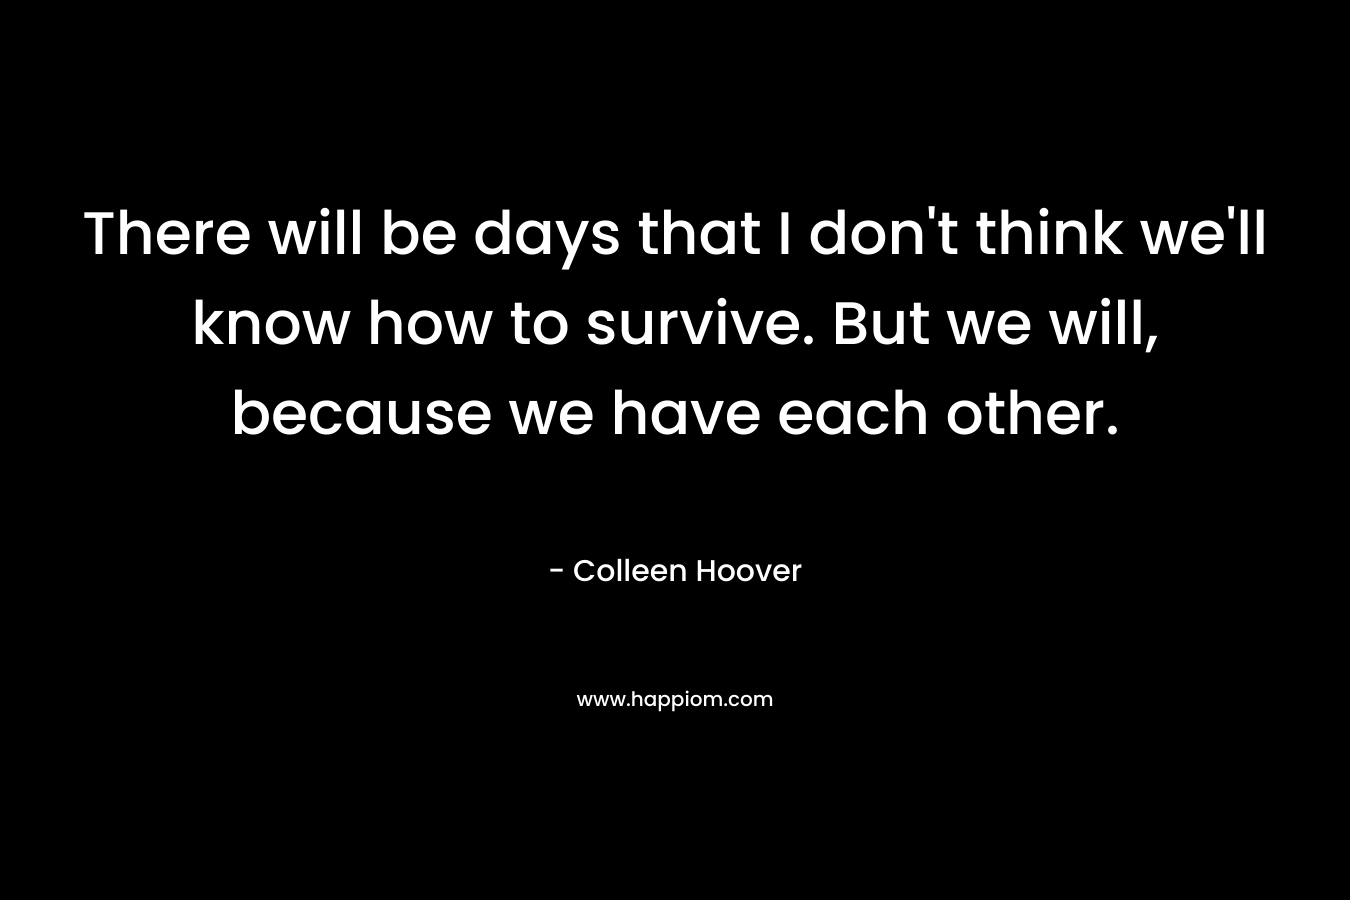 There will be days that I don't think we'll know how to survive. But we will, because we have each other.